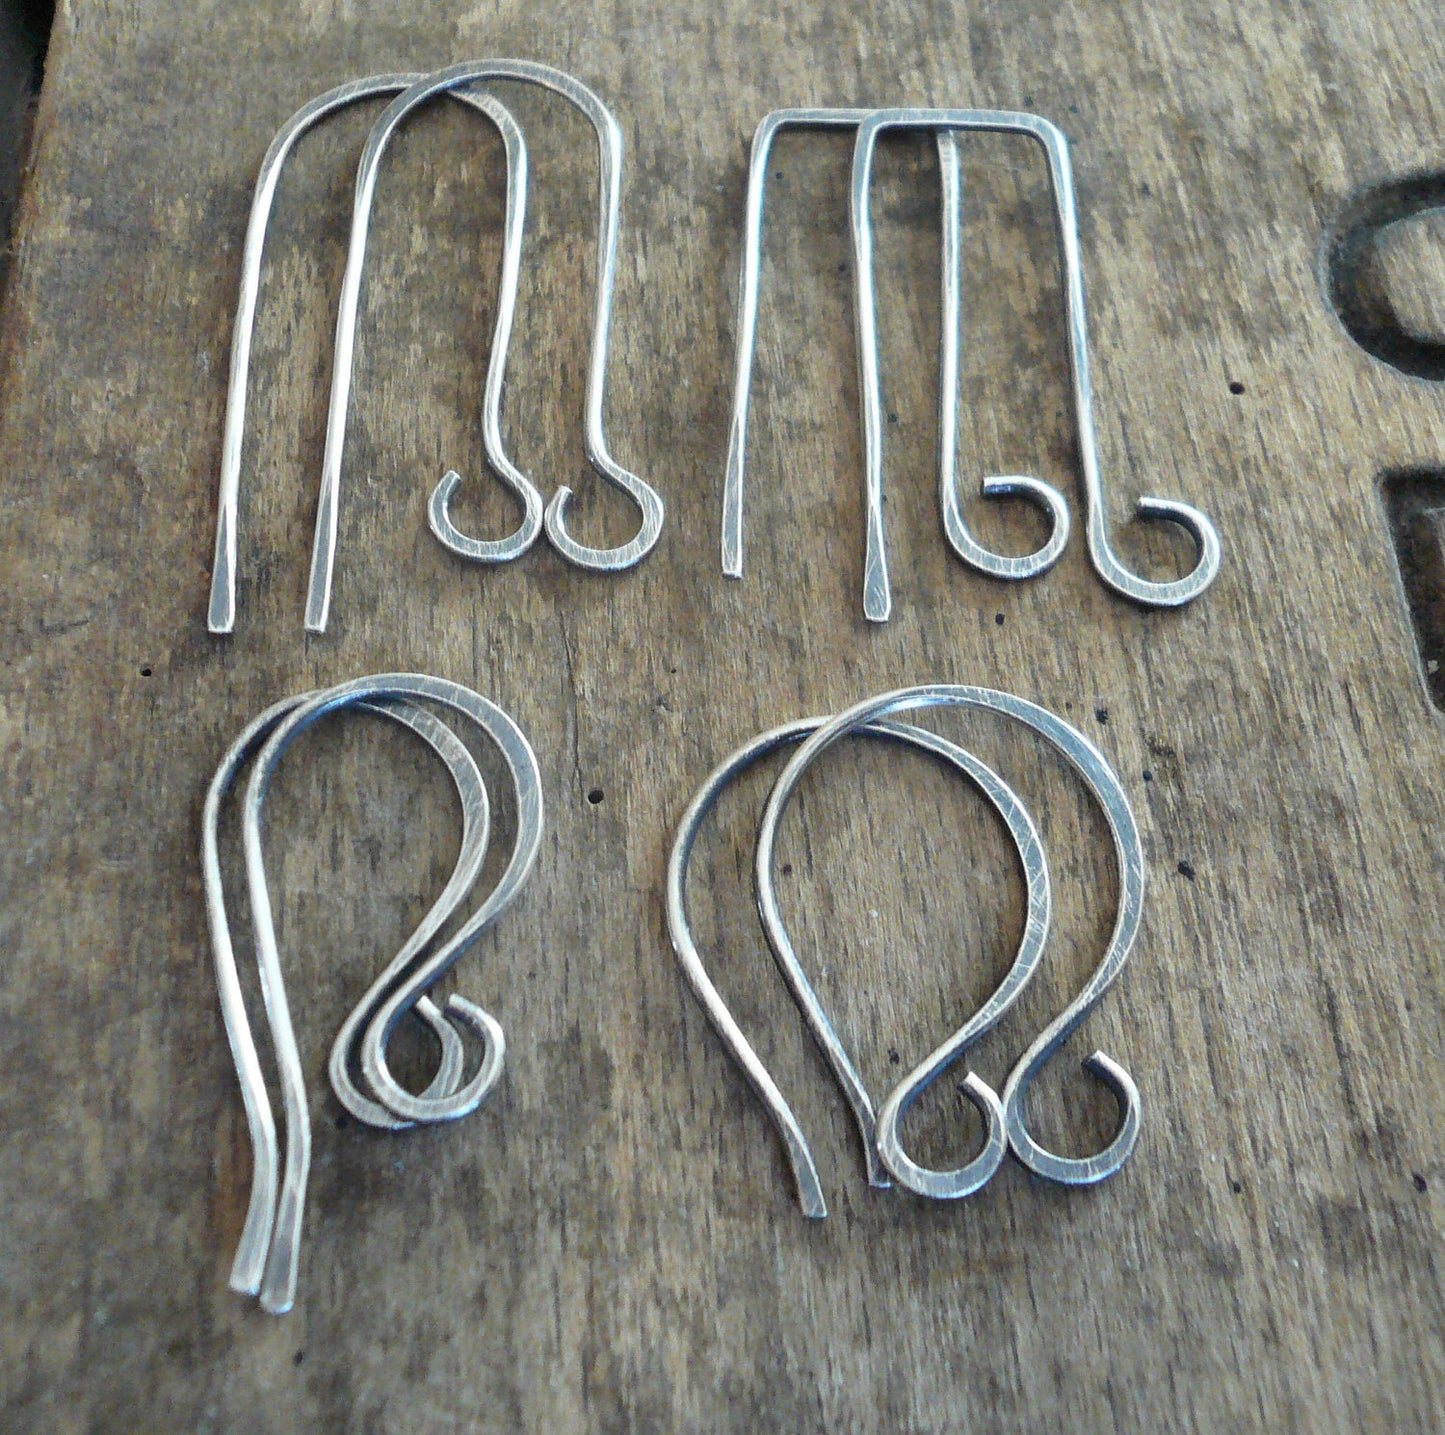 8 Pair Variety Pack Sterling Silver Earwires - Handmade. Handforged. Oxidized and polished